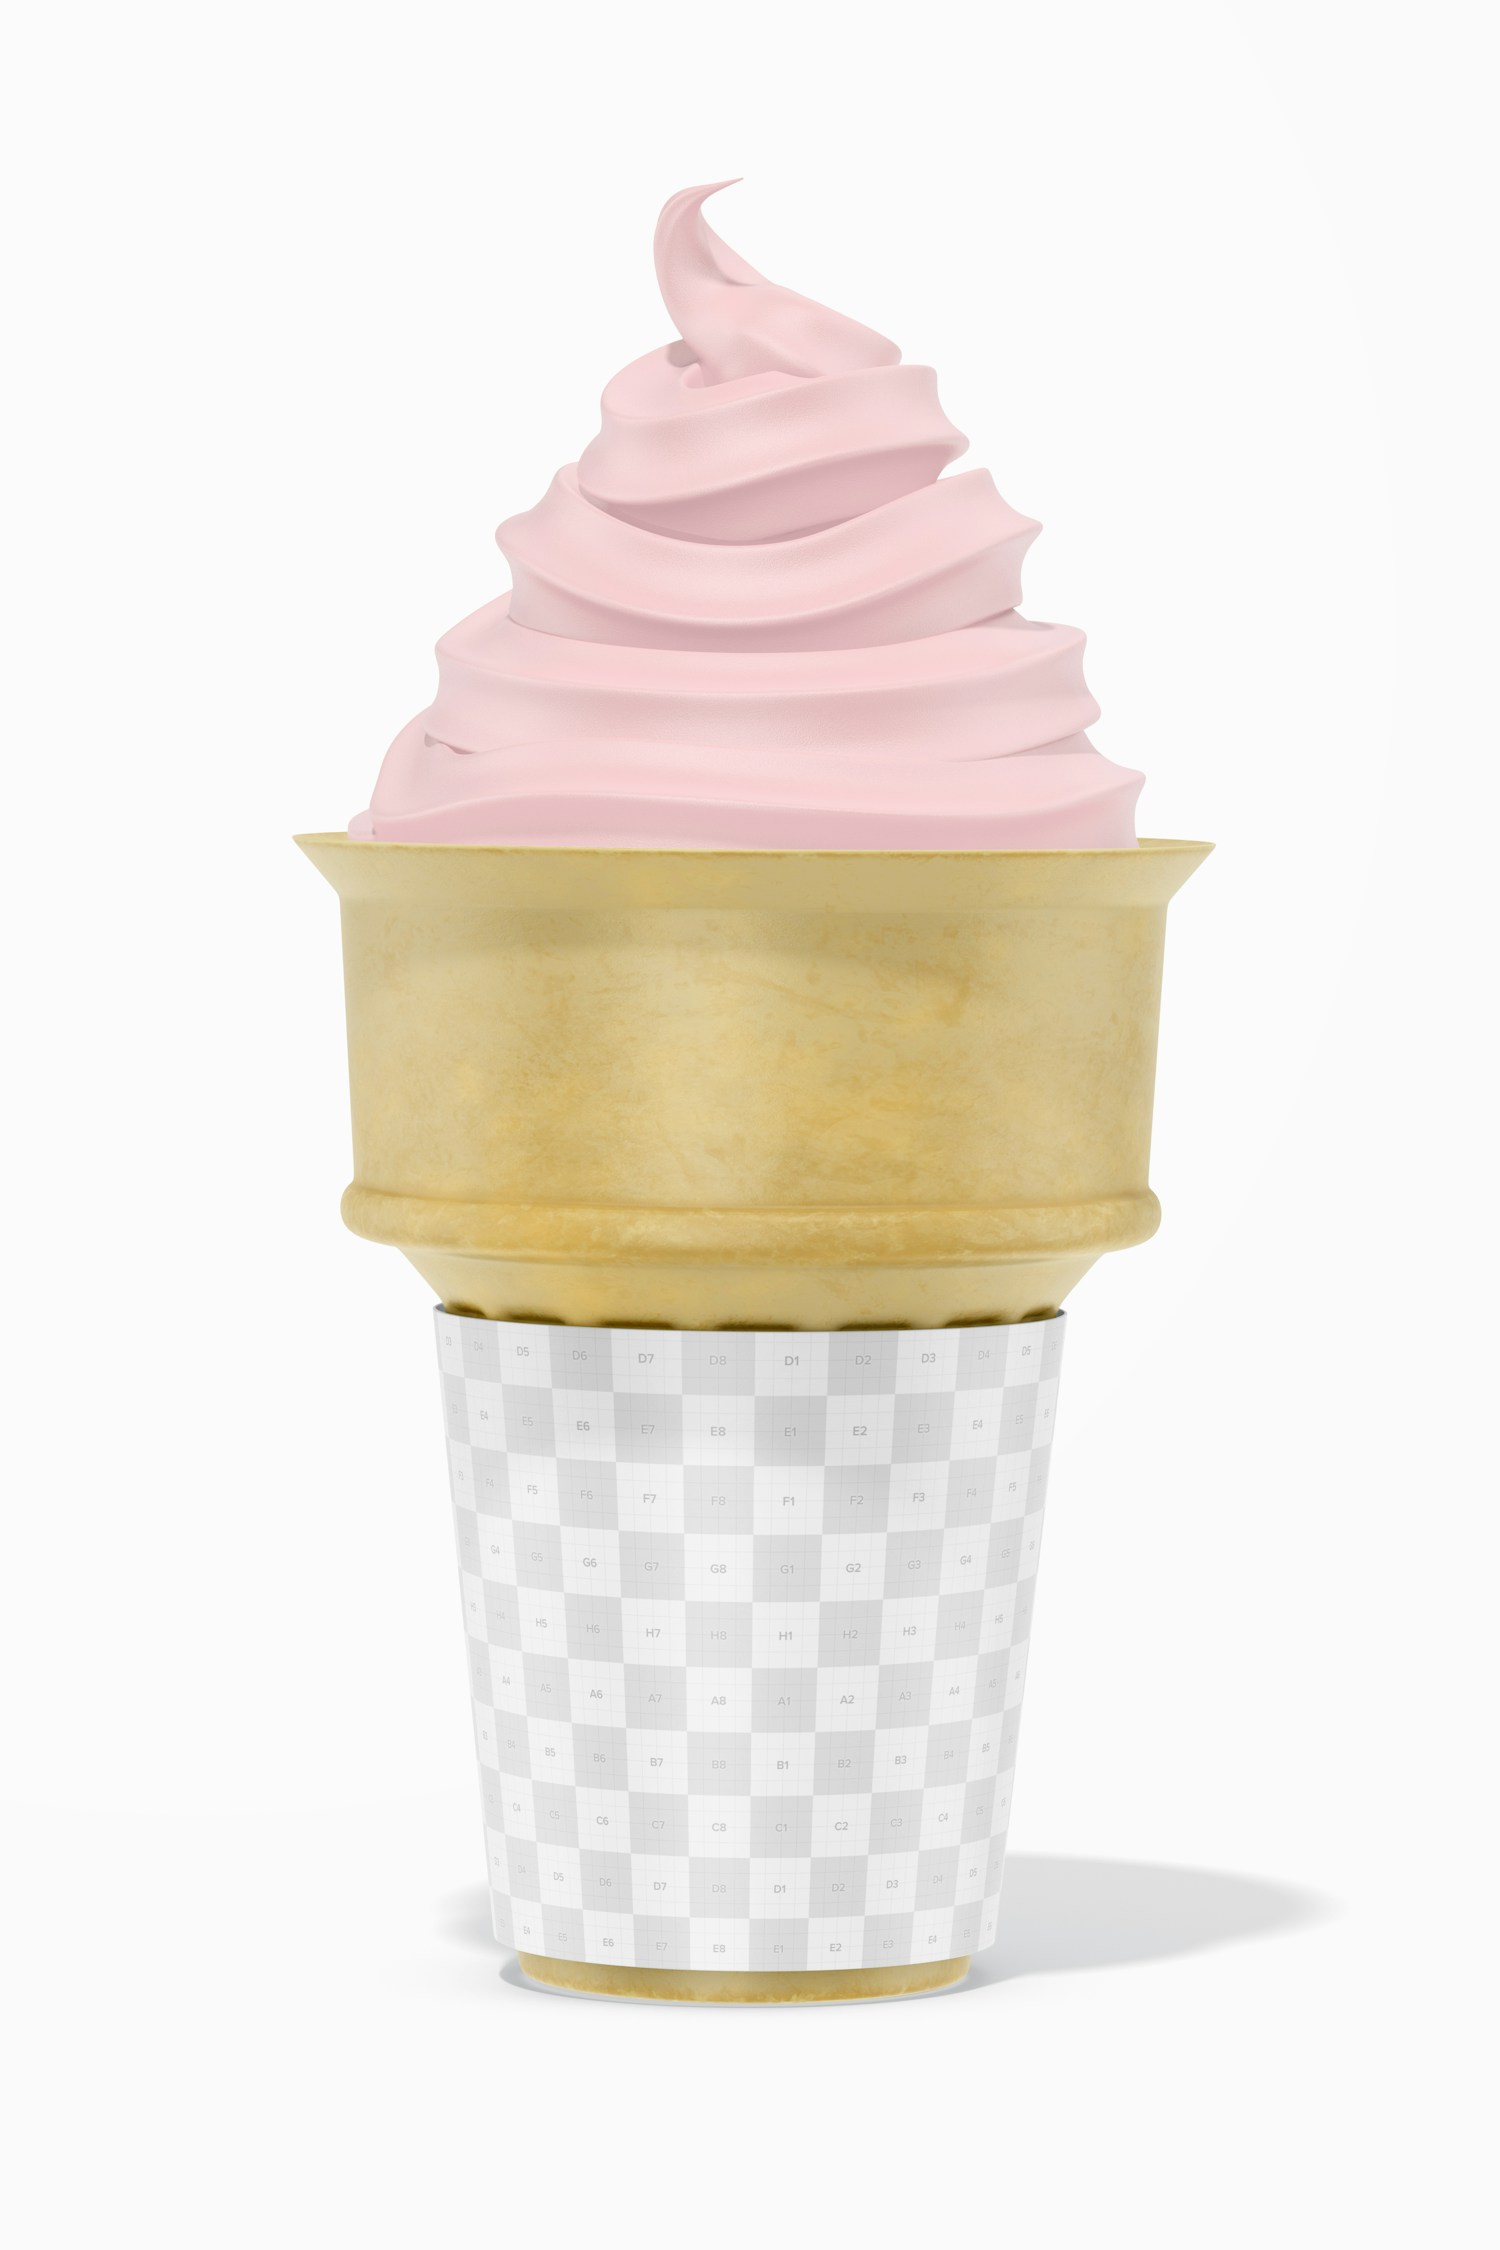 Label for Small Cone Mockup, Front View